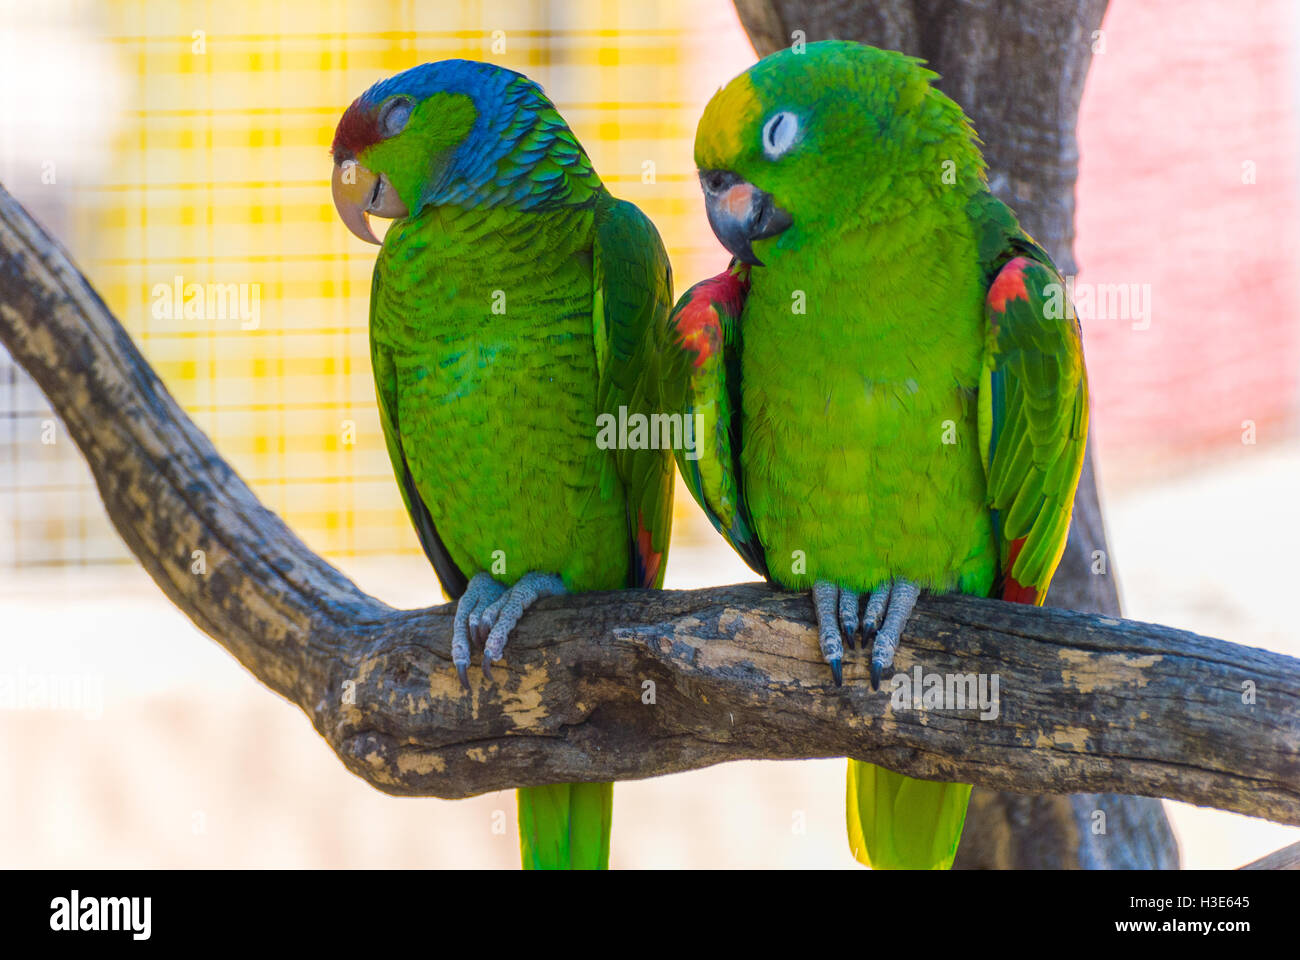 Two green parrots Stock Photo - Alamy